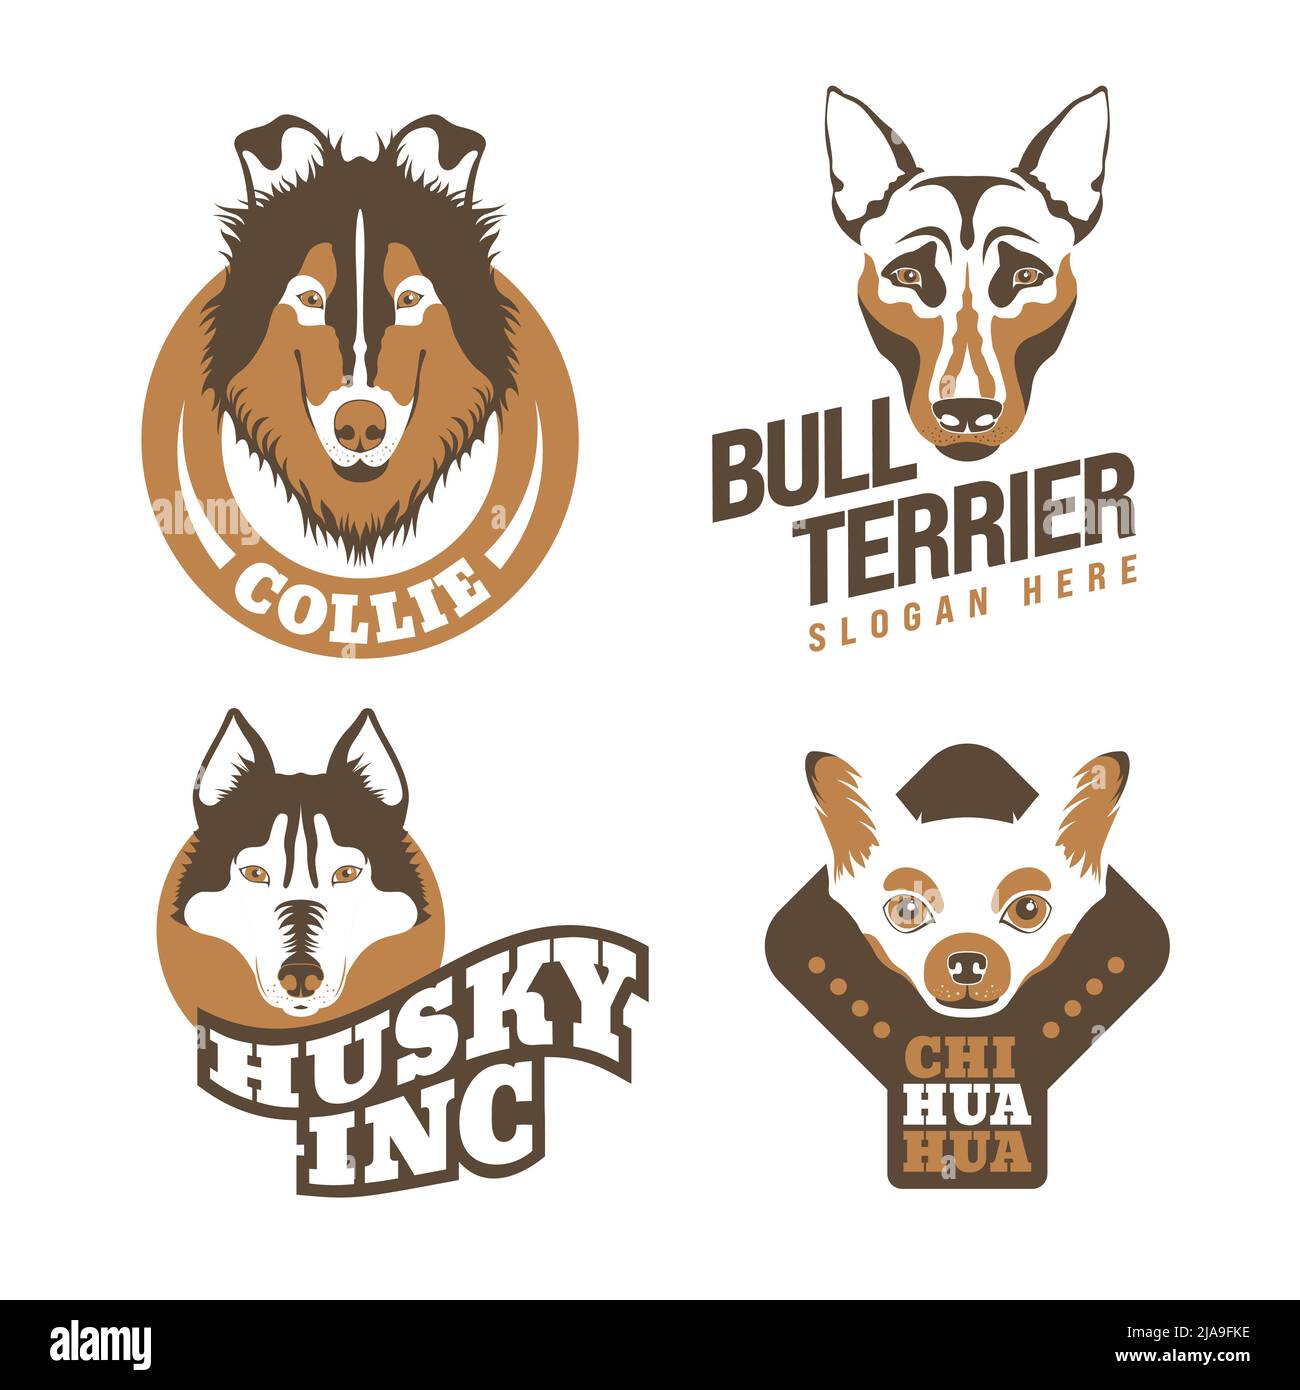 https://c8.alamy.com/comp/2JA9FKE/flat-dogs-breeds-logo-design-set-with-cute-faces-of-collie-bull-terrier-husky-and-chihuahua-isolated-vector-illustration-2JA9FKE.jpg